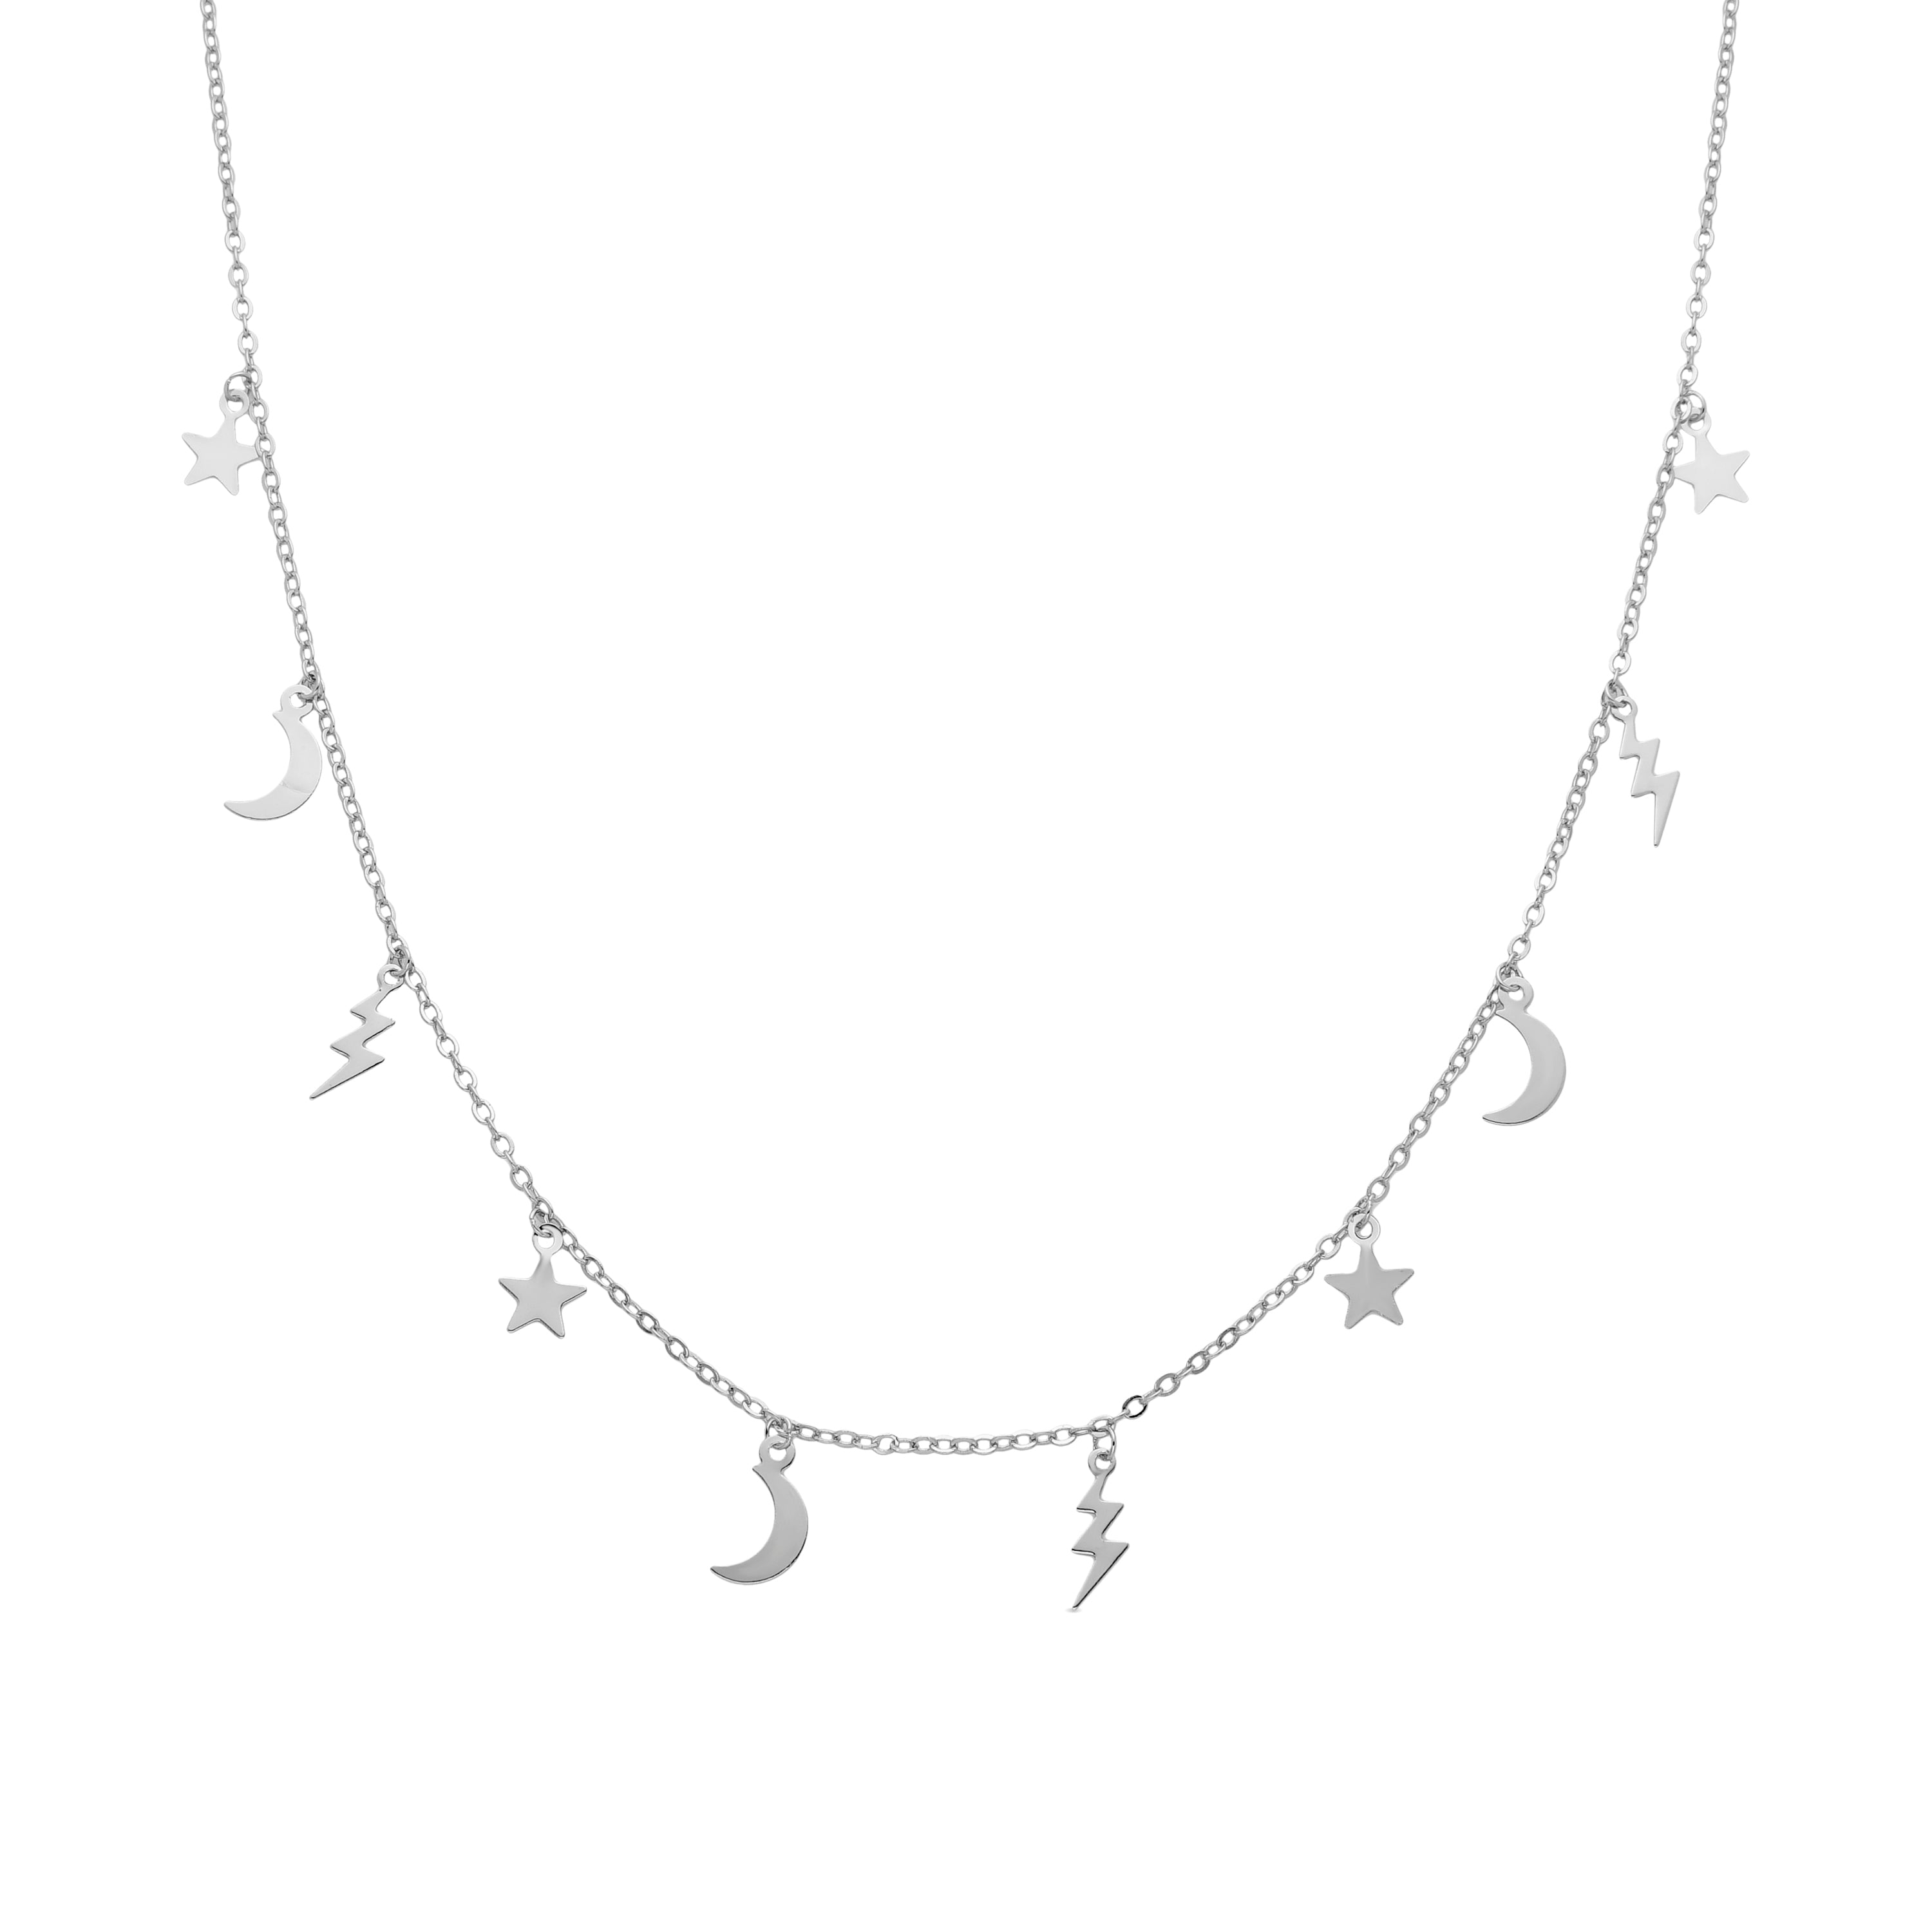 Collier Diaxi finition argent